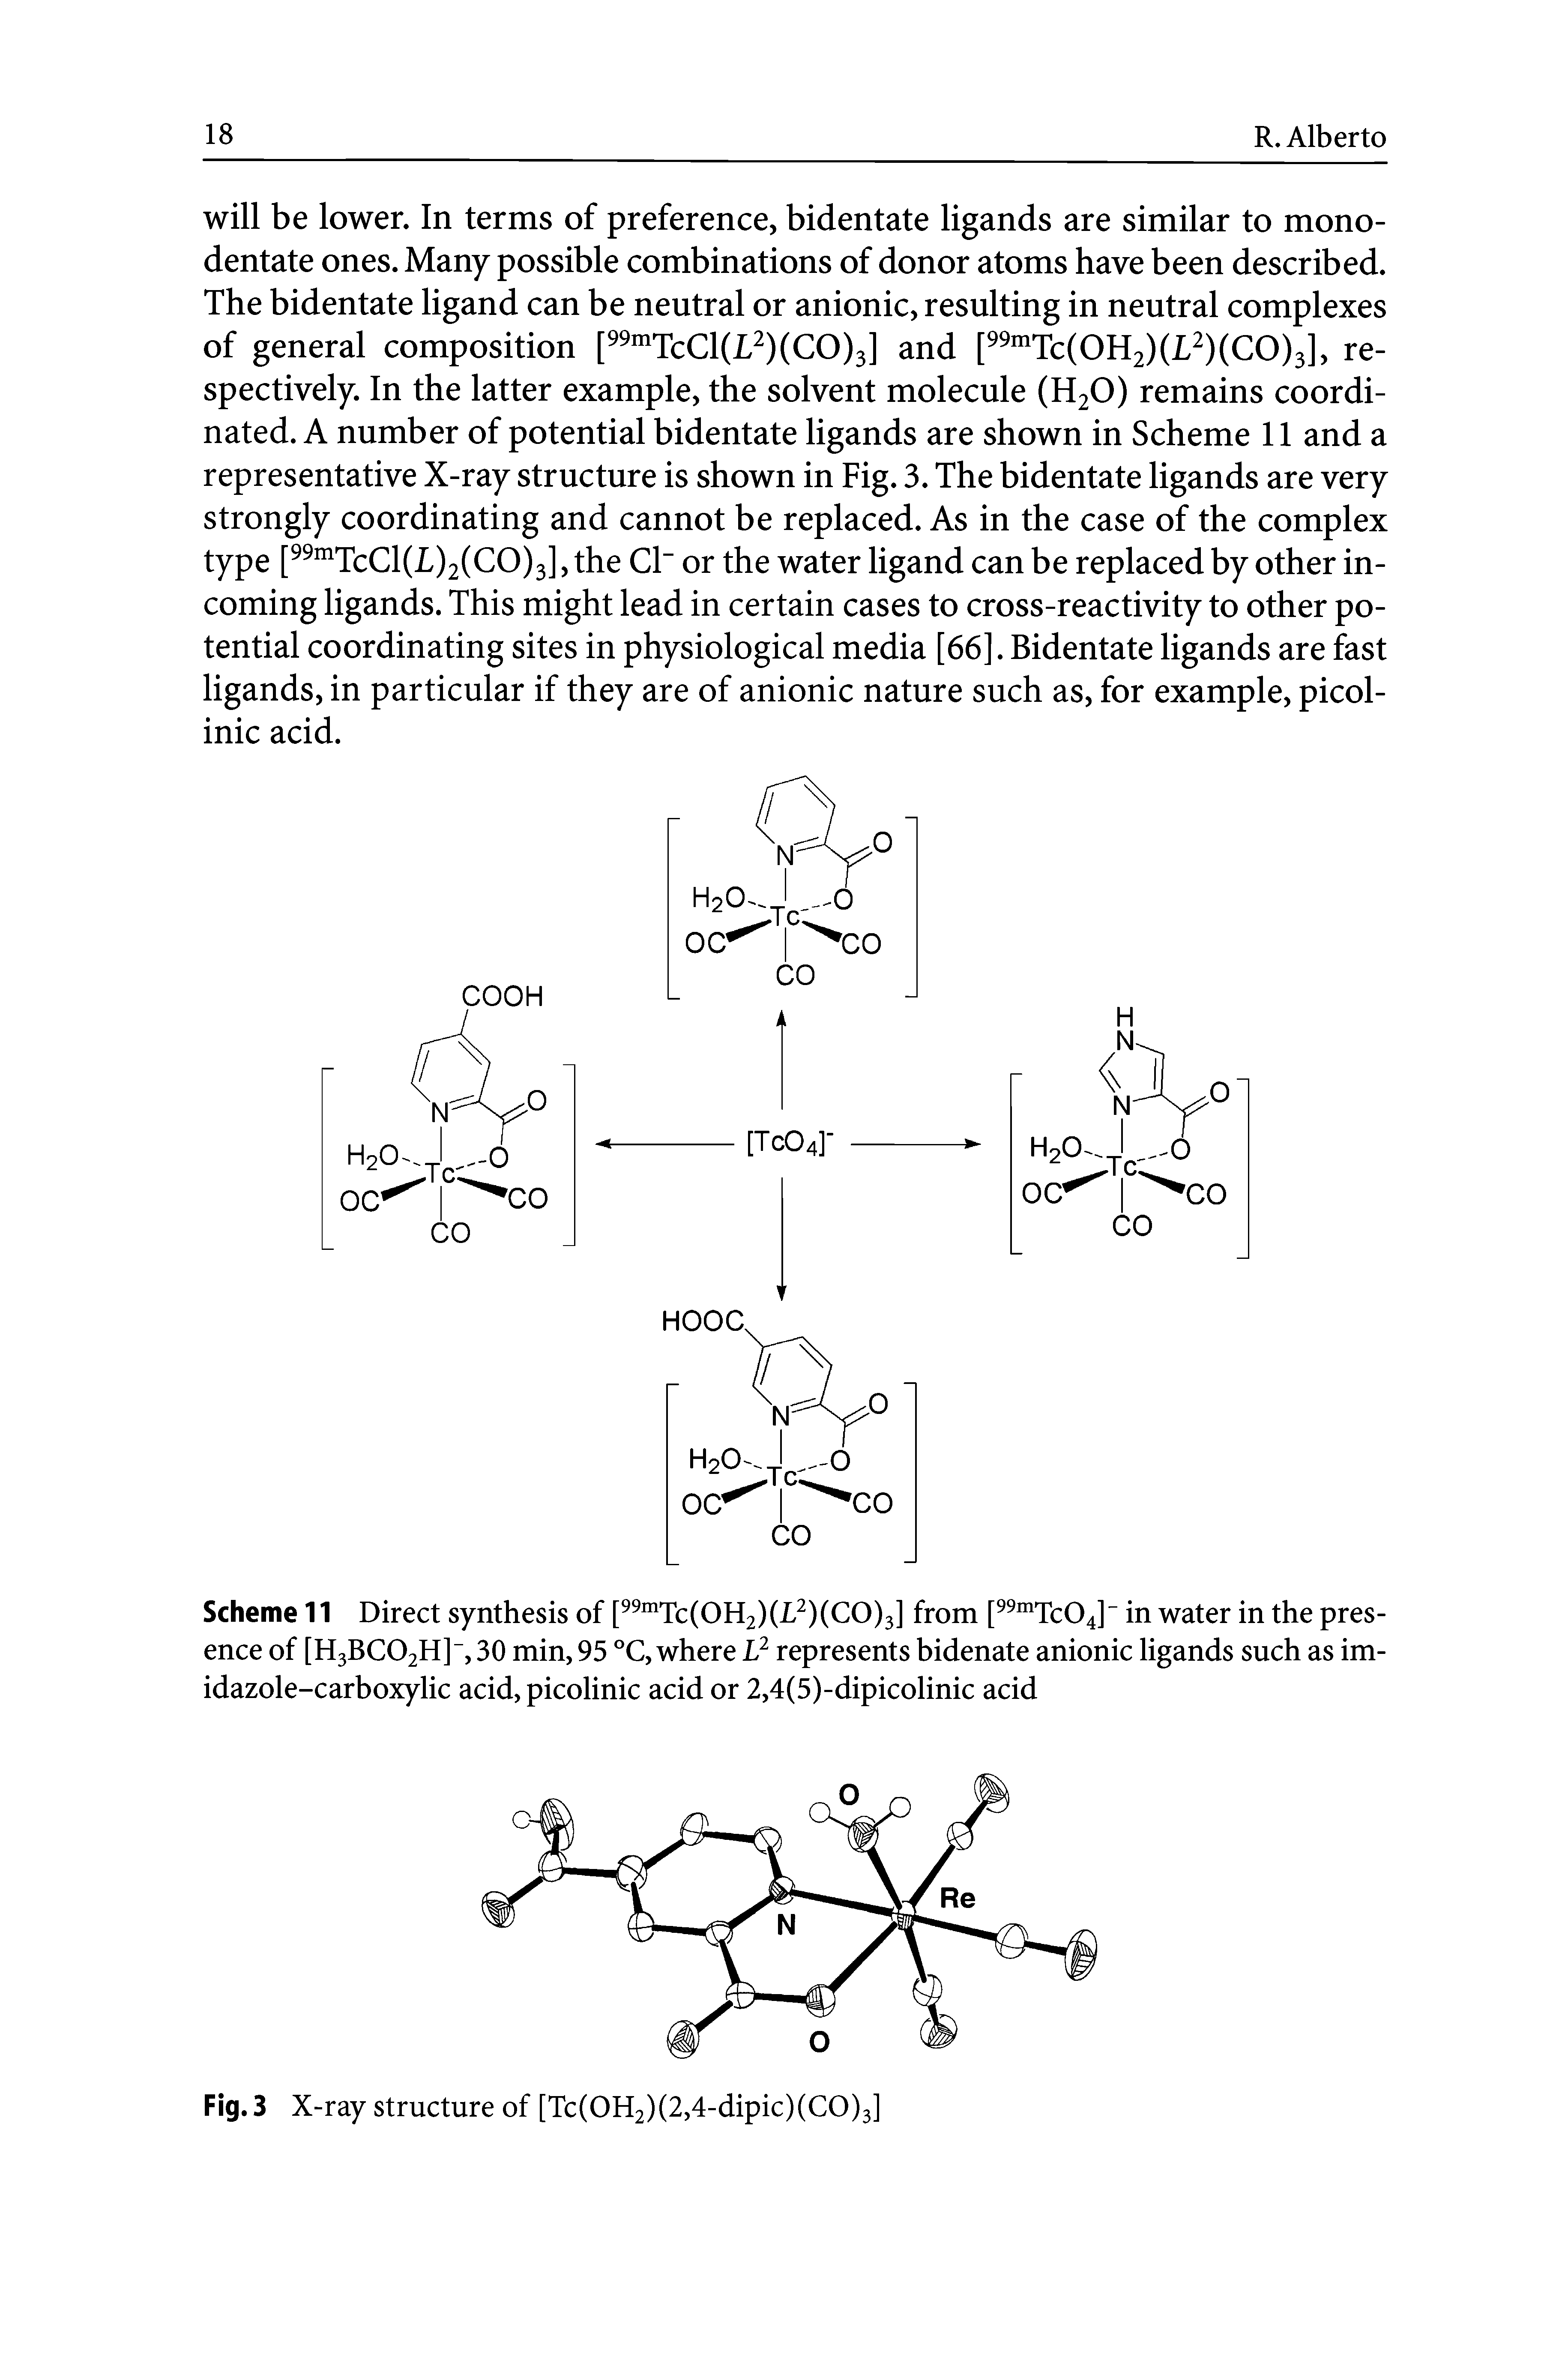 Scheme 11 Direct synthesis of [99mTc(OH2)(L2)(CO)3] from [99mTc04] in water in the presence of [H3BC02H], 30 min, 95 °C, where L2 represents bidenate anionic ligands such as imidazole-carboxylic acid, picolinic acid or 2,4(5)-dipicolinic acid...